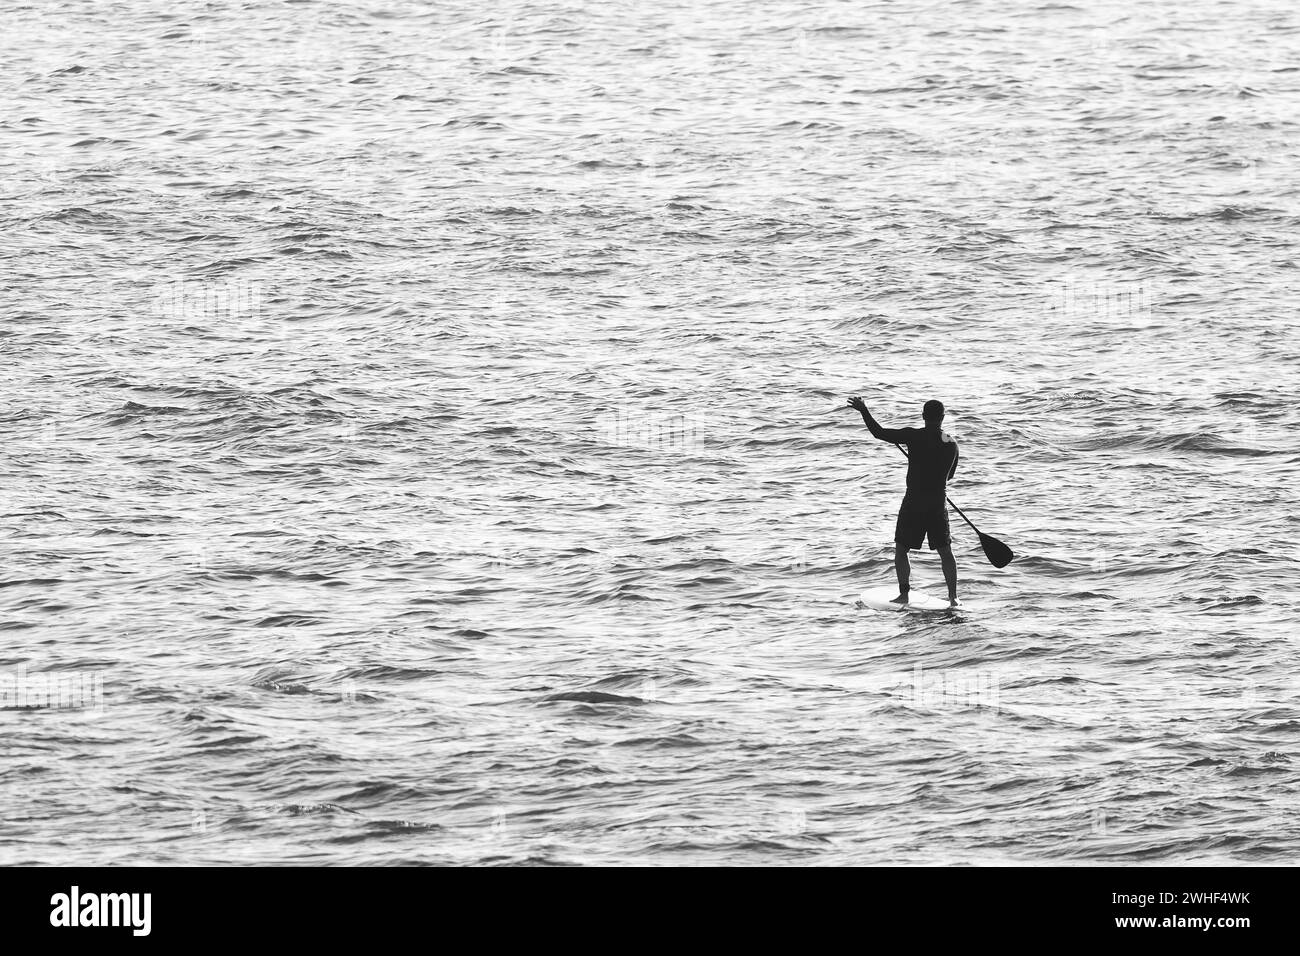 Man on Stand Up Paddle Board Stock Photo